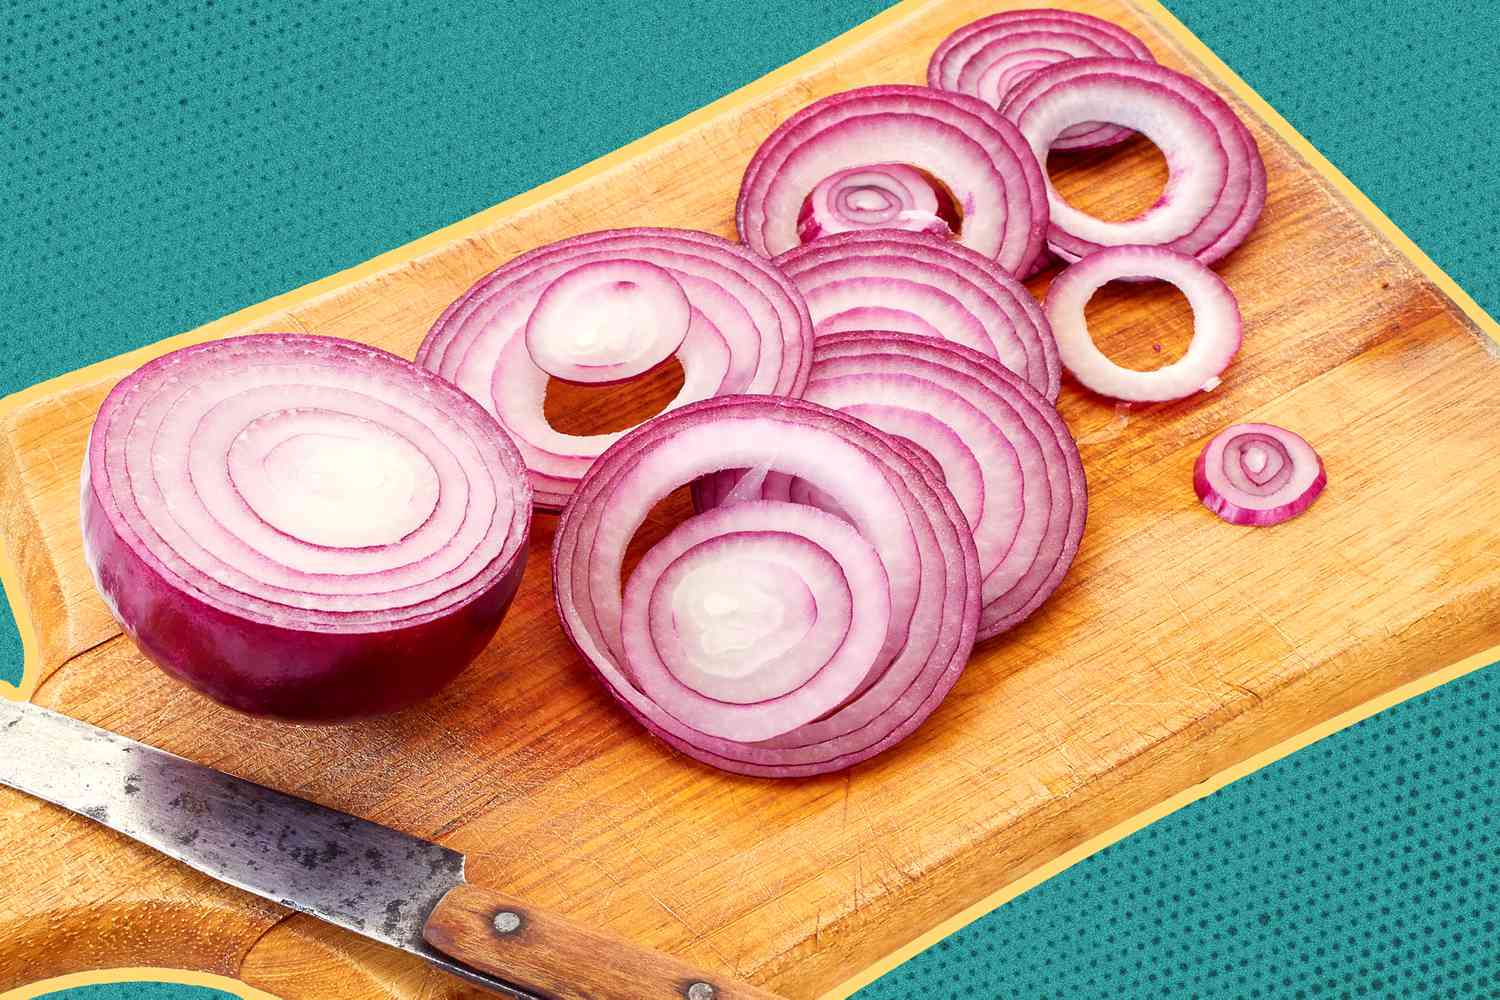 Discover The Surprising Reason Behind My Sudden Love For Raw Onions